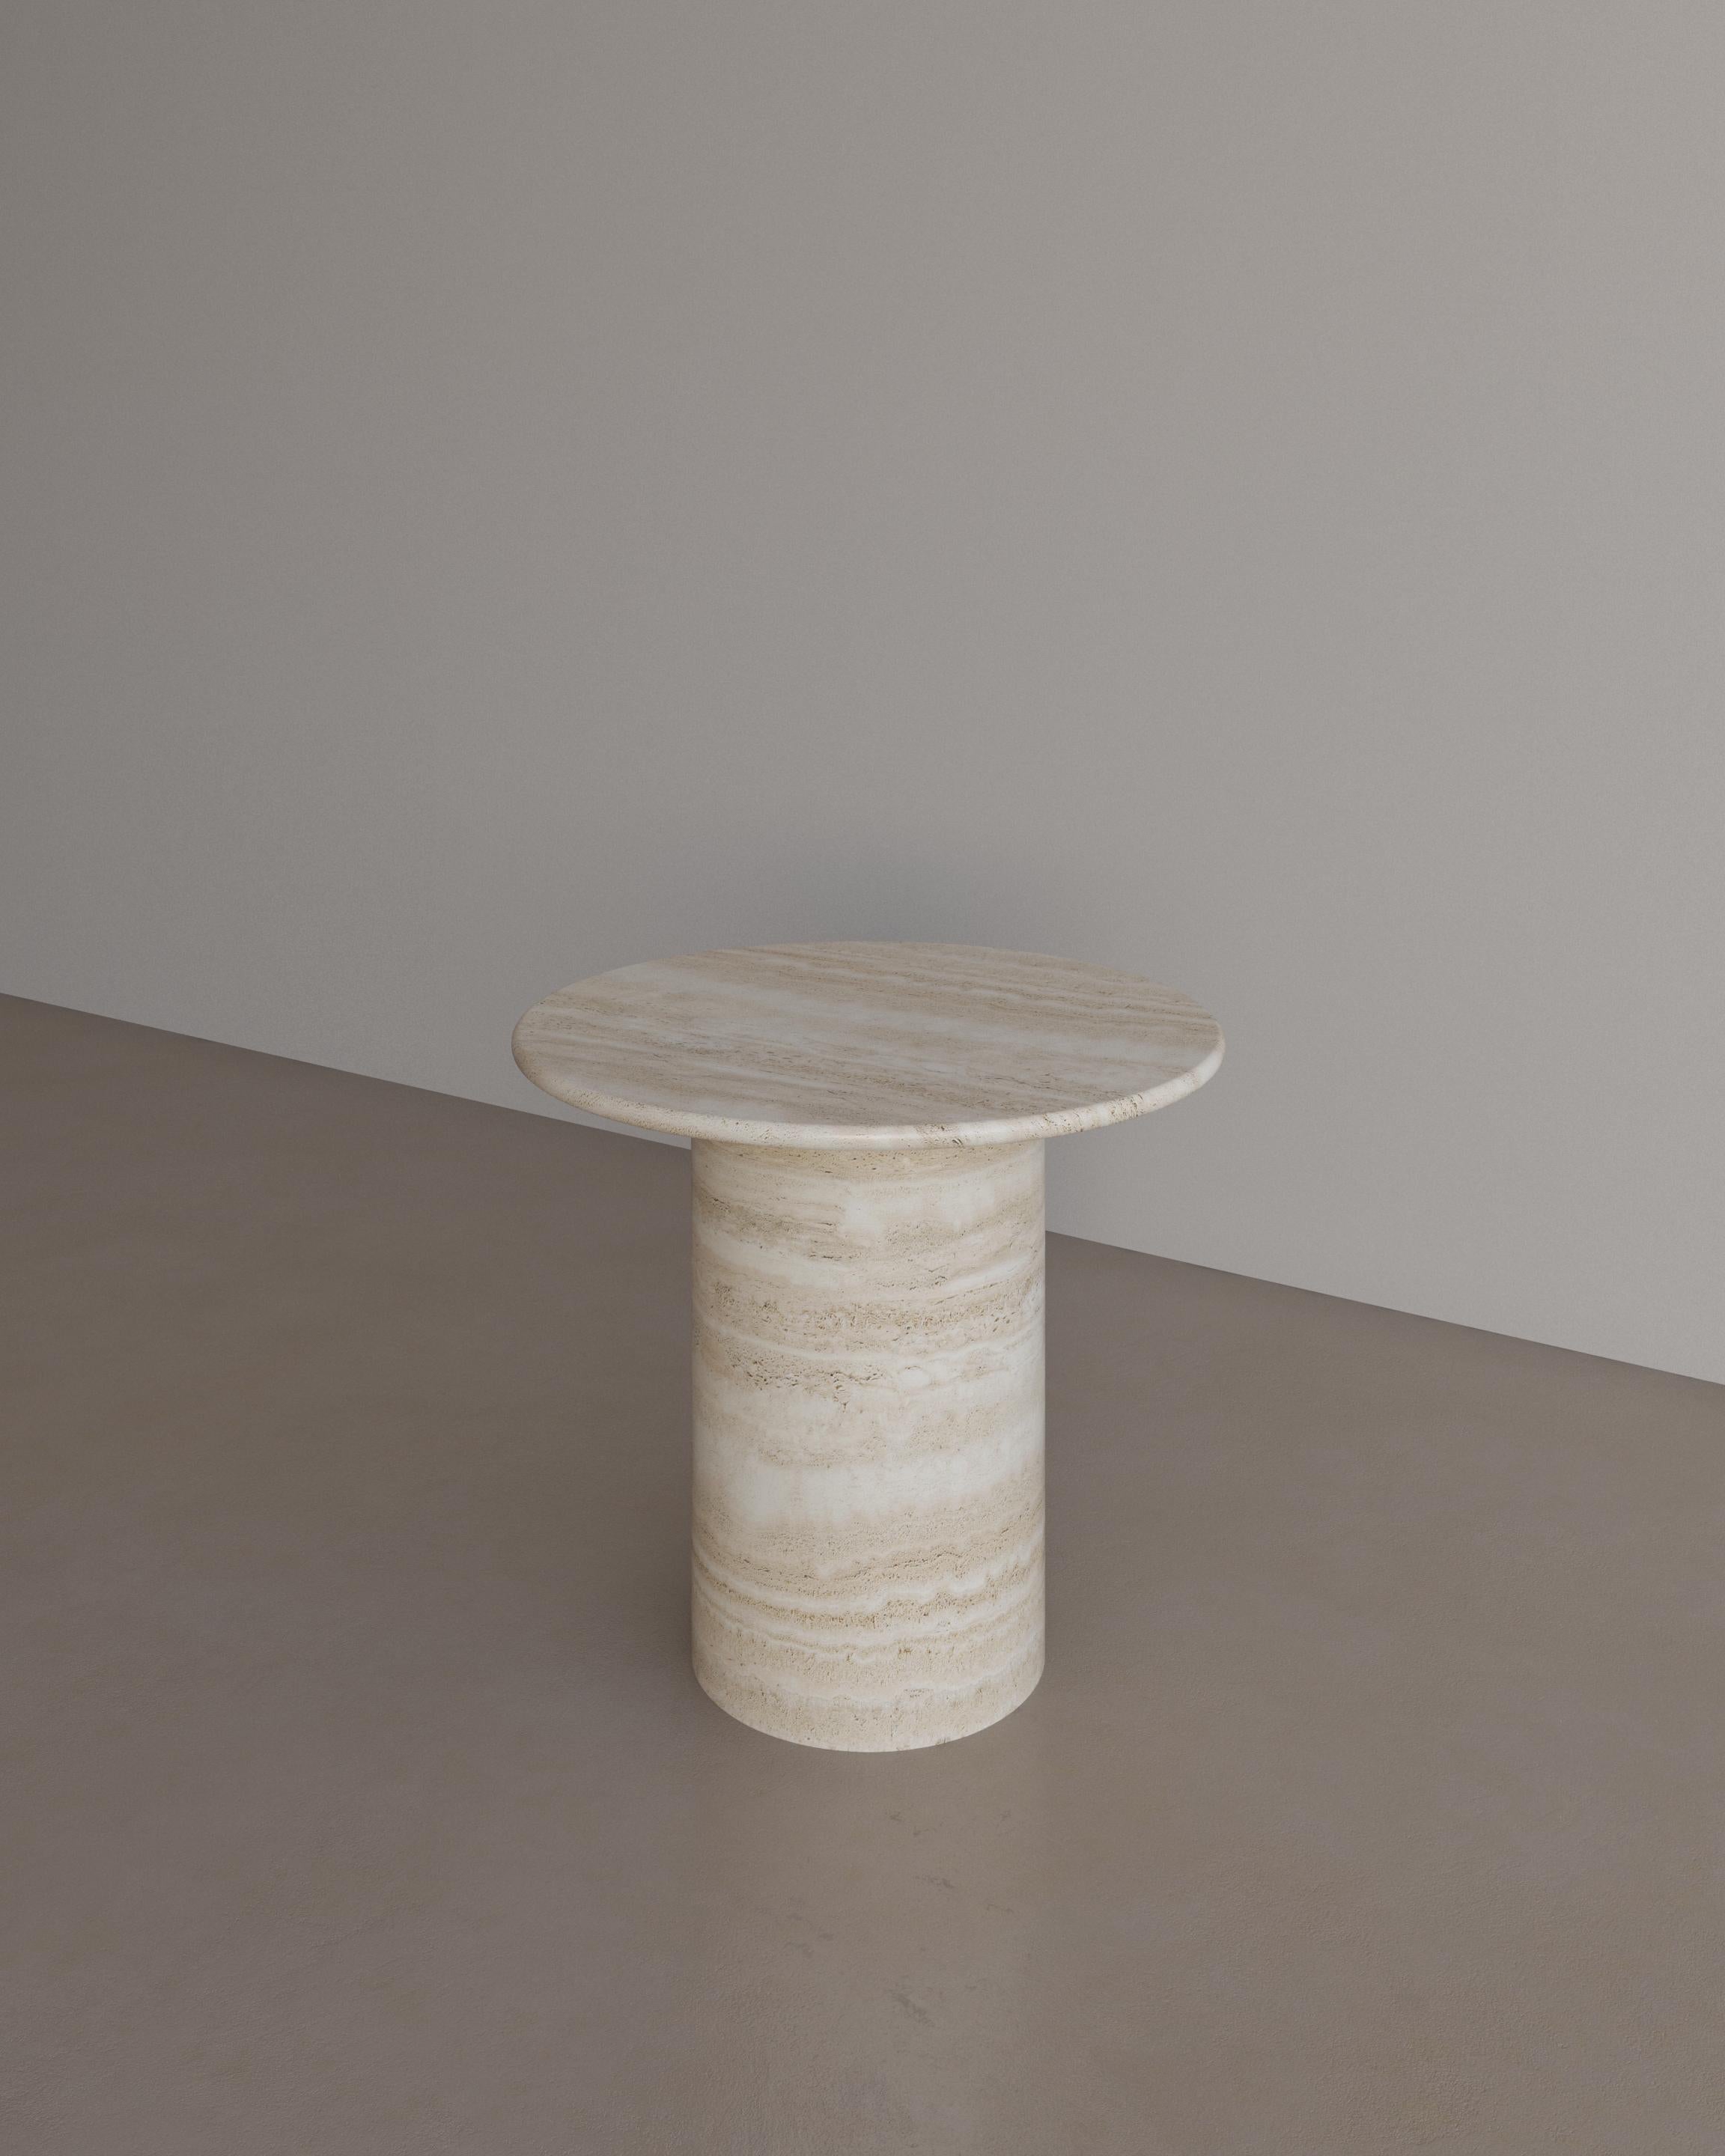 The Essentialist presents the Voyage Occasional Table I in Nude Travertine. 
The Voyage Occasional Table I celebrates the simple pleasures that define life and replenish the soul through harnessing essential form. Envisioned as an ode to historical